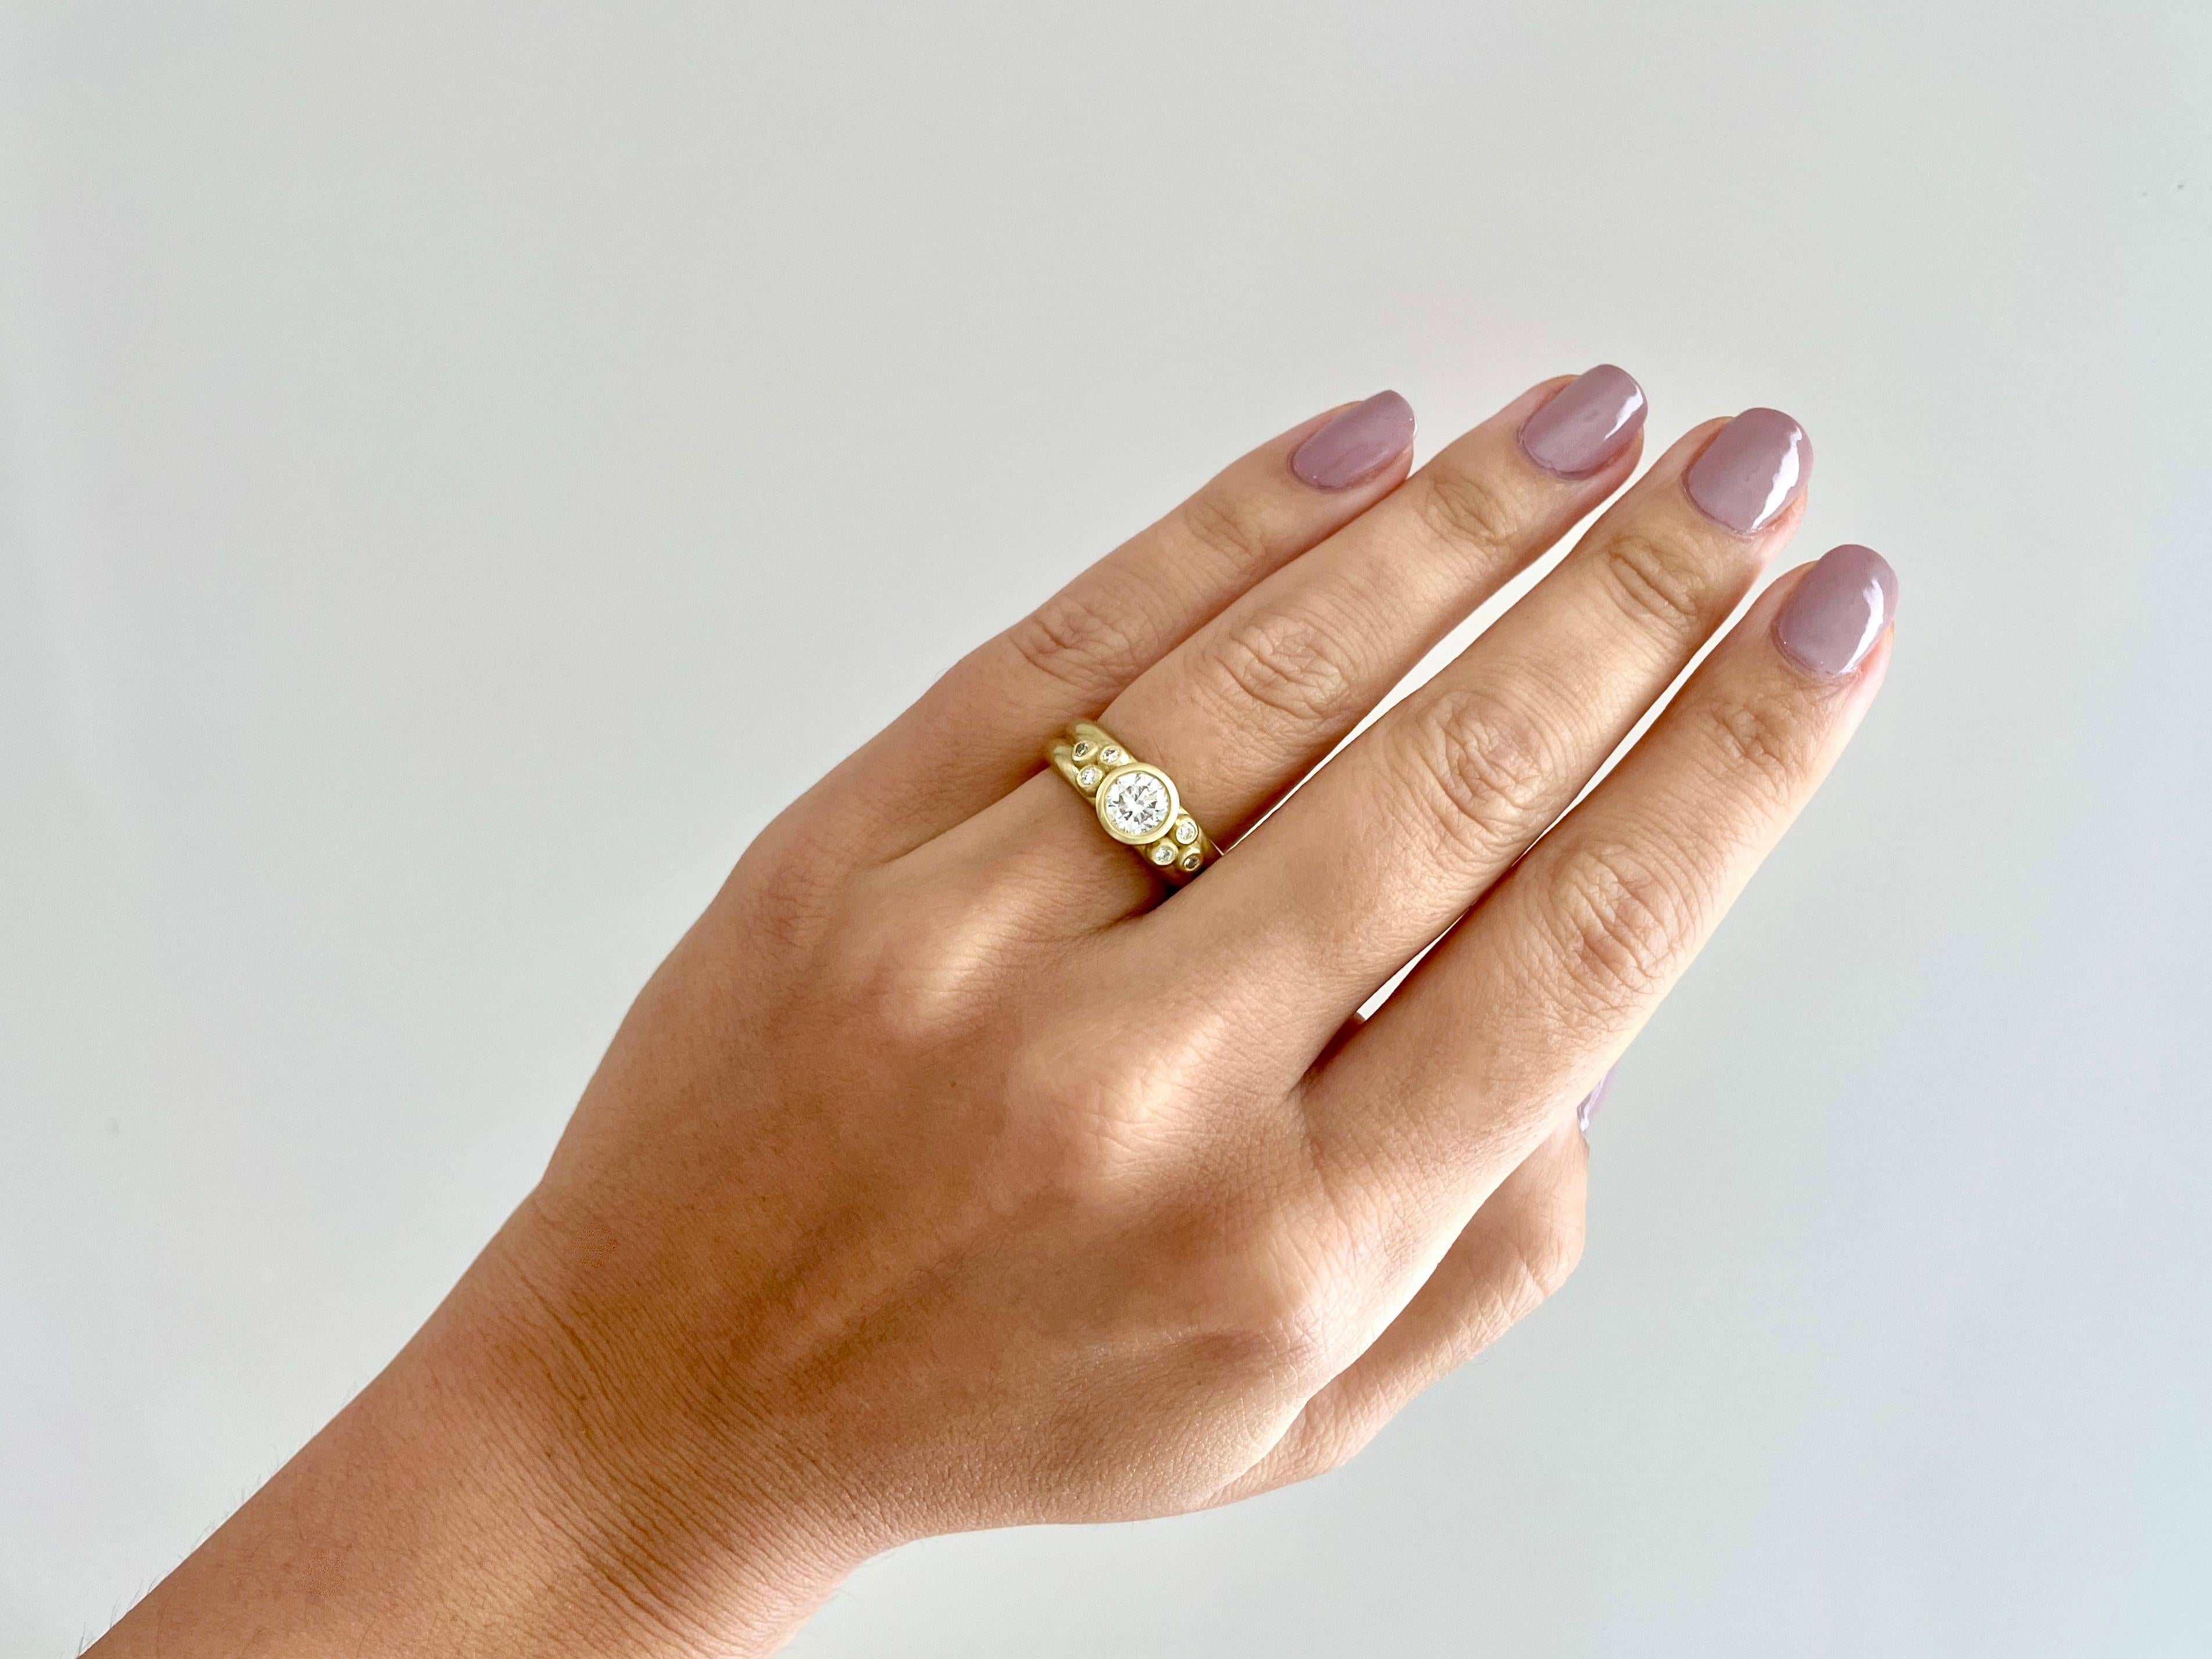 Beautifully handcrafted in Faye Kim's signature 18k Green Gold, a round brilliant cut diamond is bezel set and highlighted further by triple diamond Granulation beads. The double-width shank gives the ring an overall modern vibe that makes it a